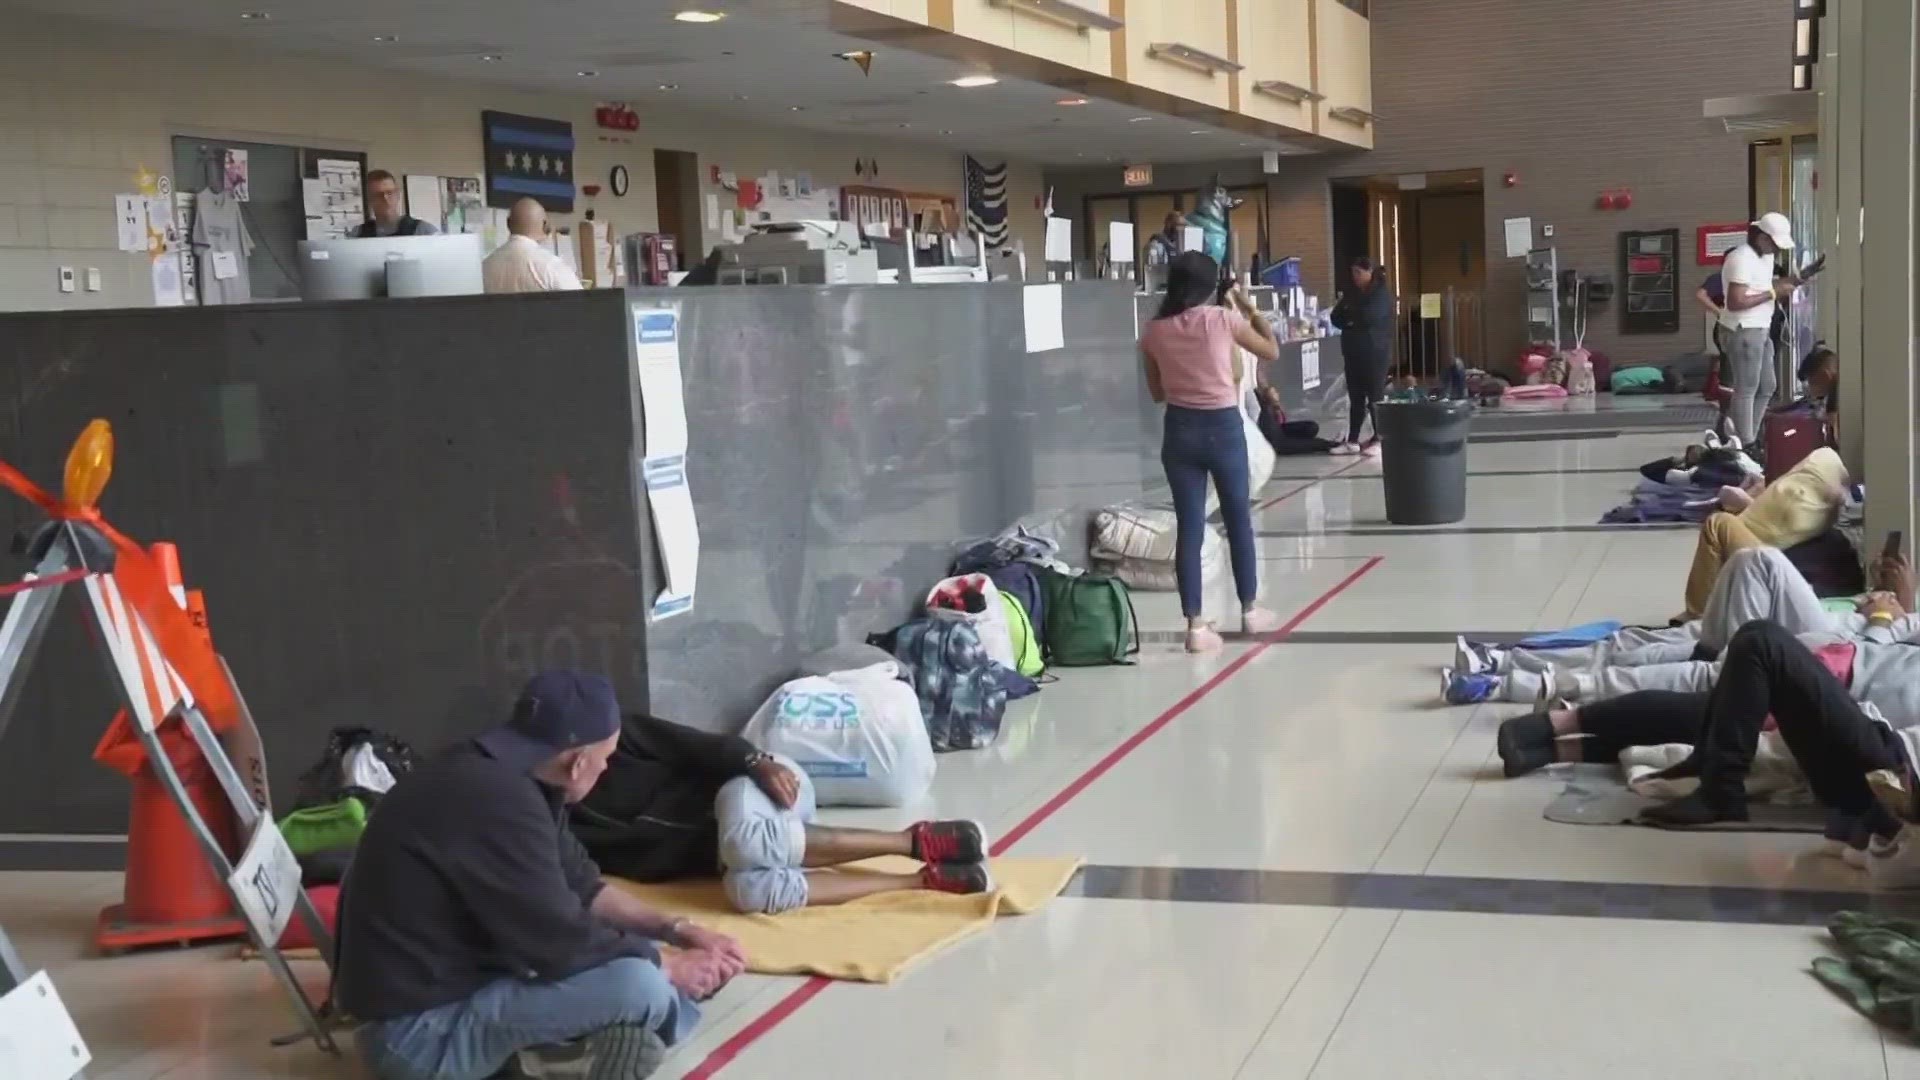 Migrants are staying at a police station in Chicago because there is no other options.